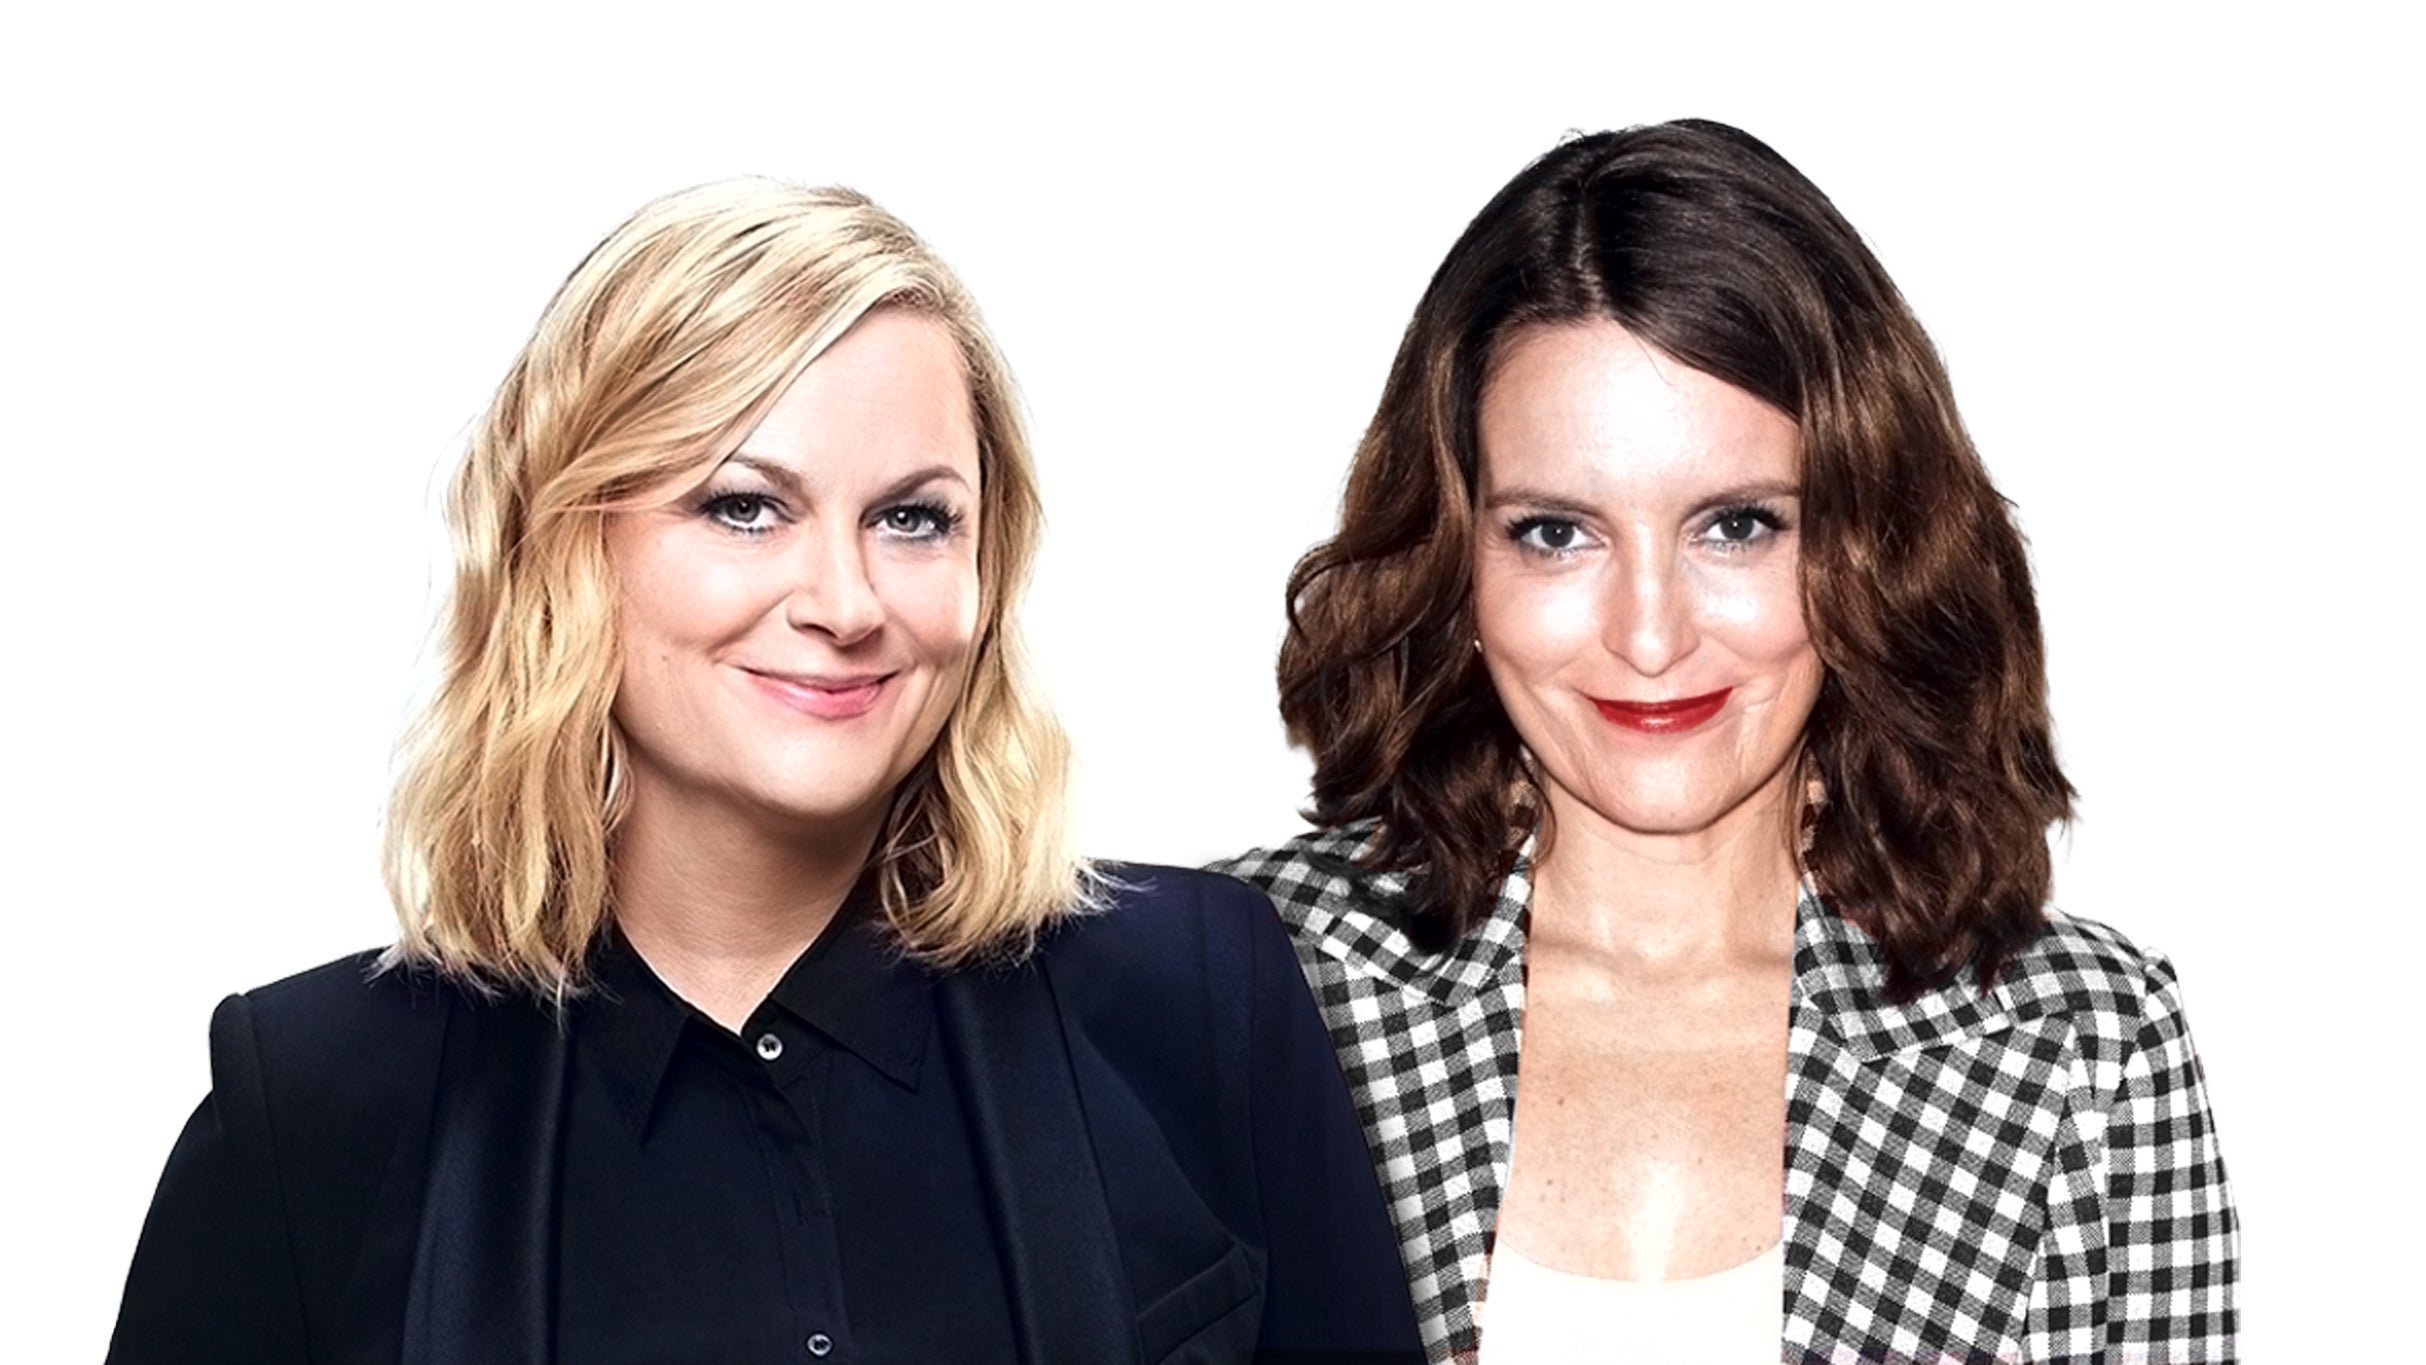 Tina Fey & Amy Poehler: Restless Leg Tour pre-sale code for show tickets in Washington, DC (DAR Constitution Hall)